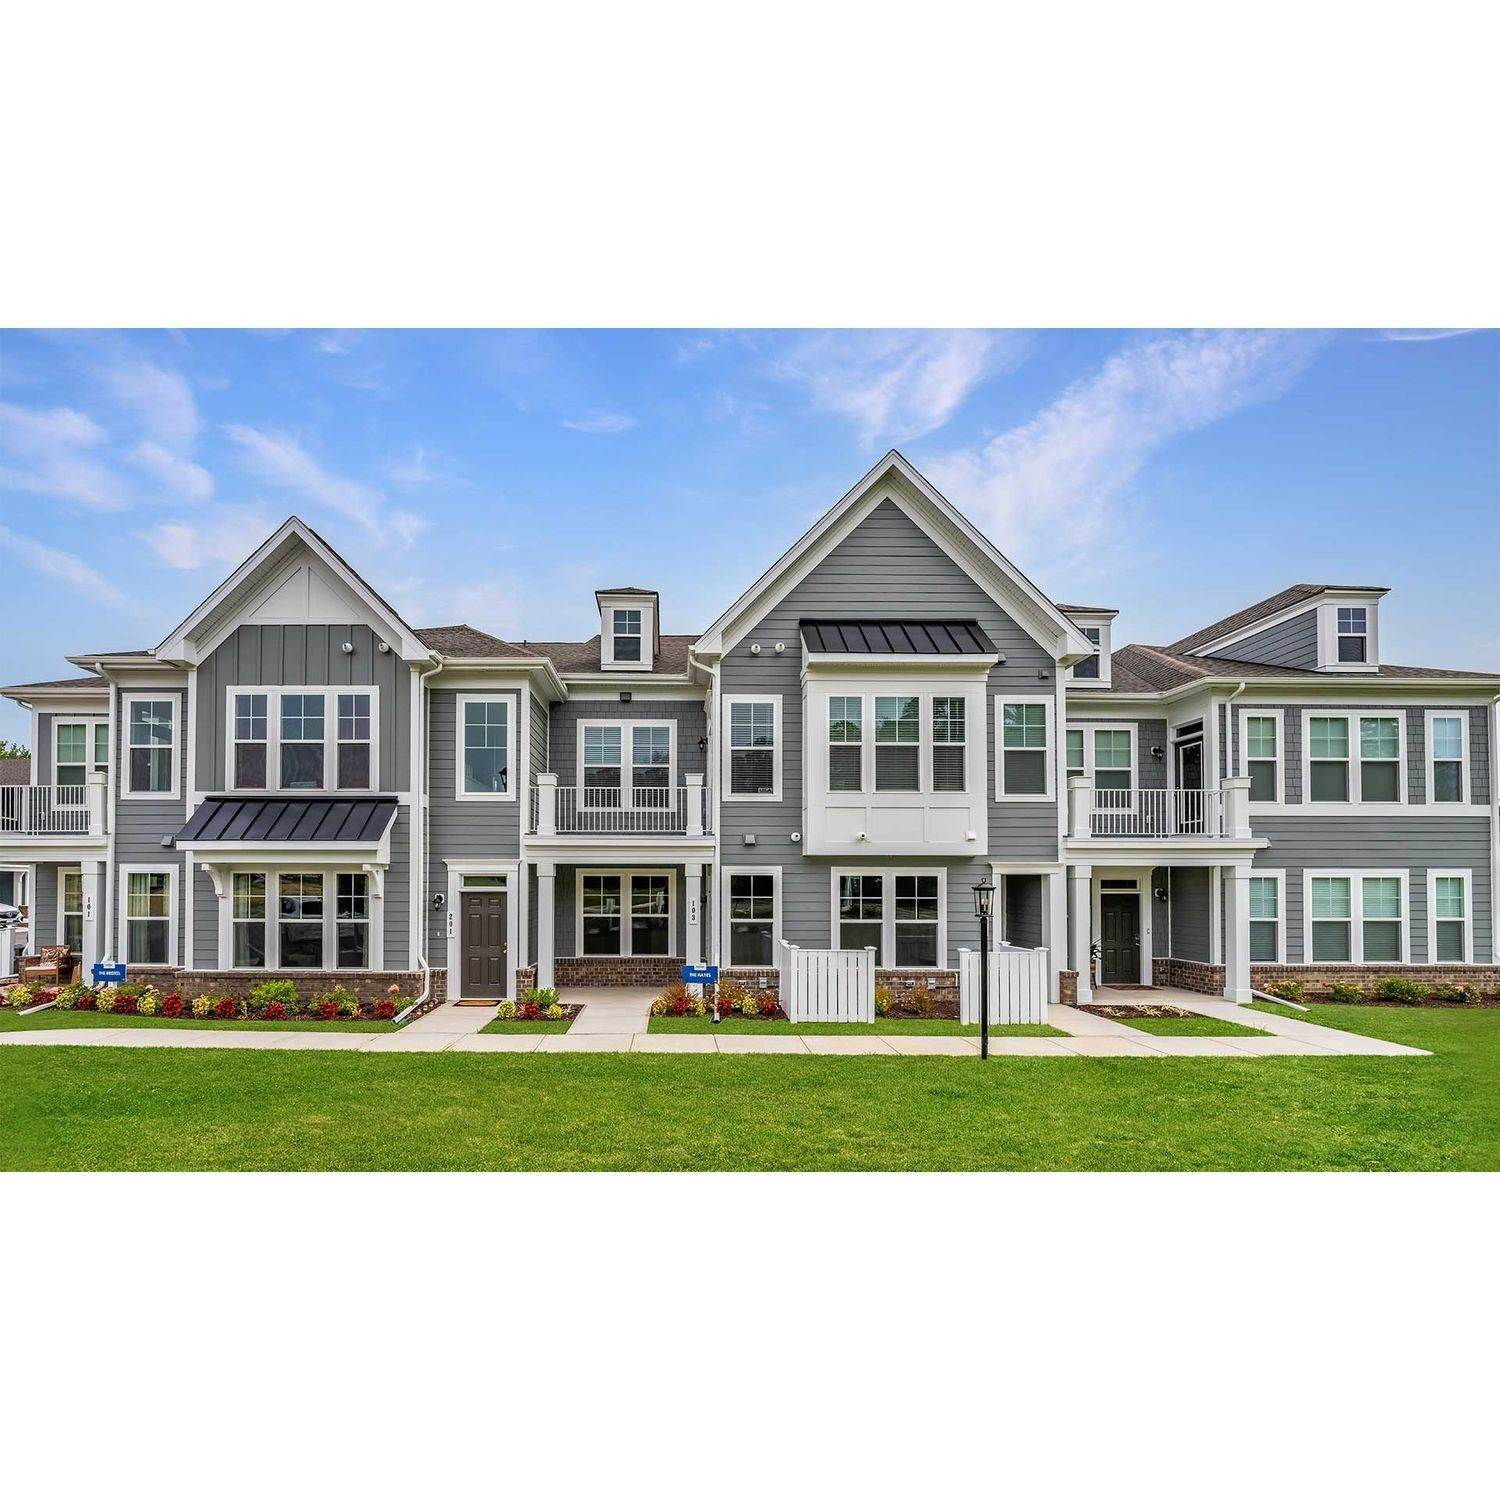 4. The Pointe at Twin Hickory Gebäude bei 4605 Pouncey Tract Road, Glen Allen, VA 23059